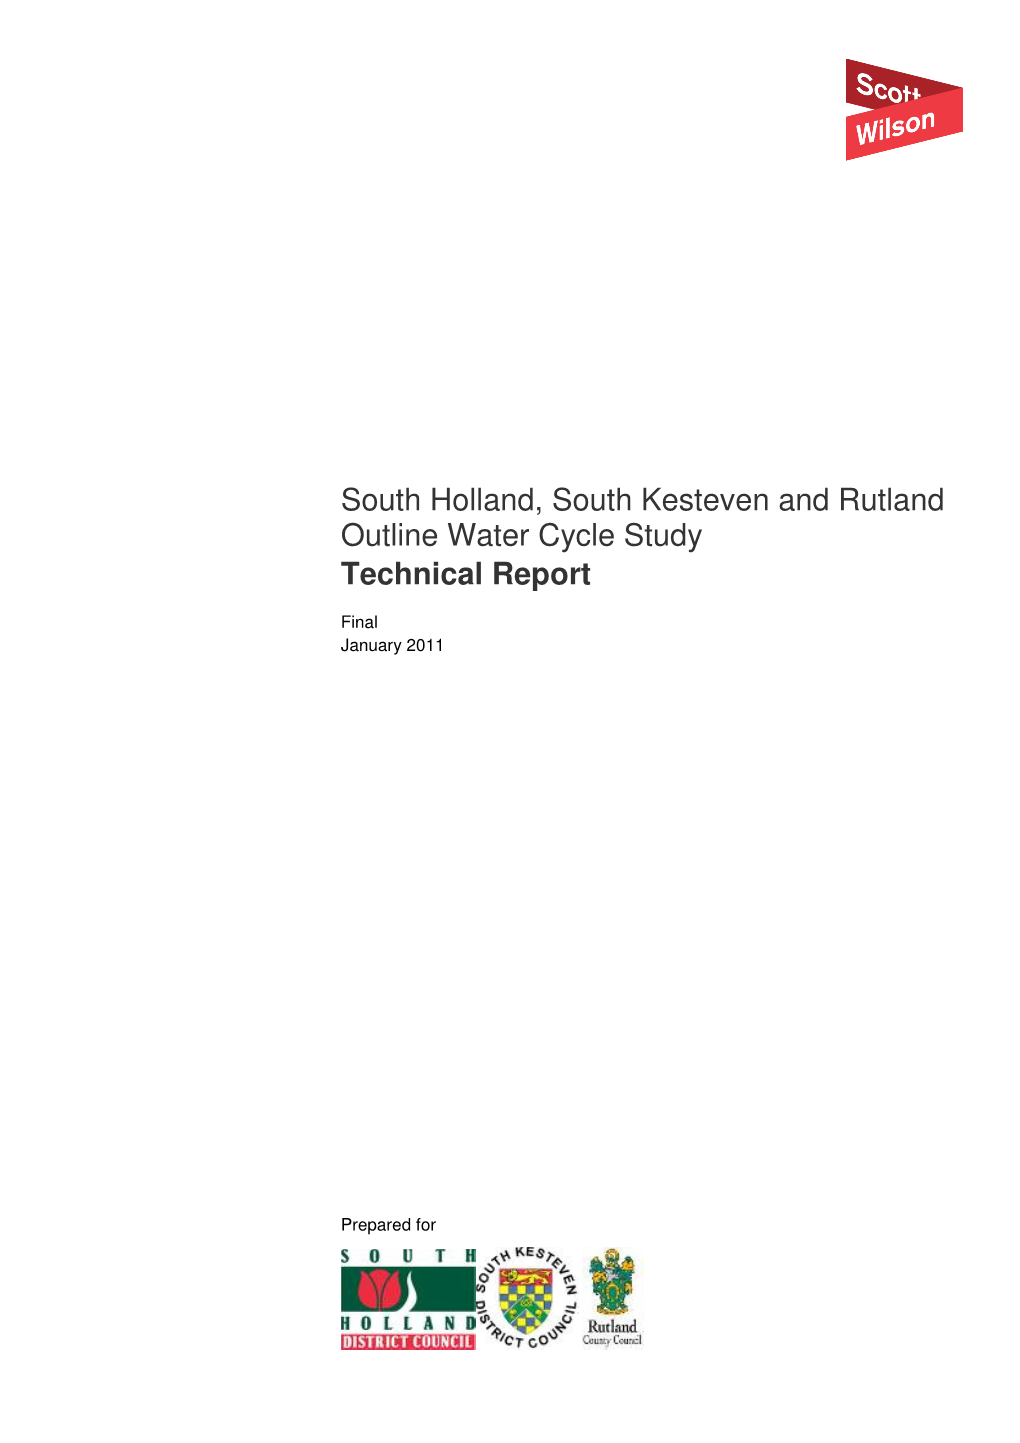 South Holland, South Kesteven and Rutland Outline Water Cycle Study Technical Report